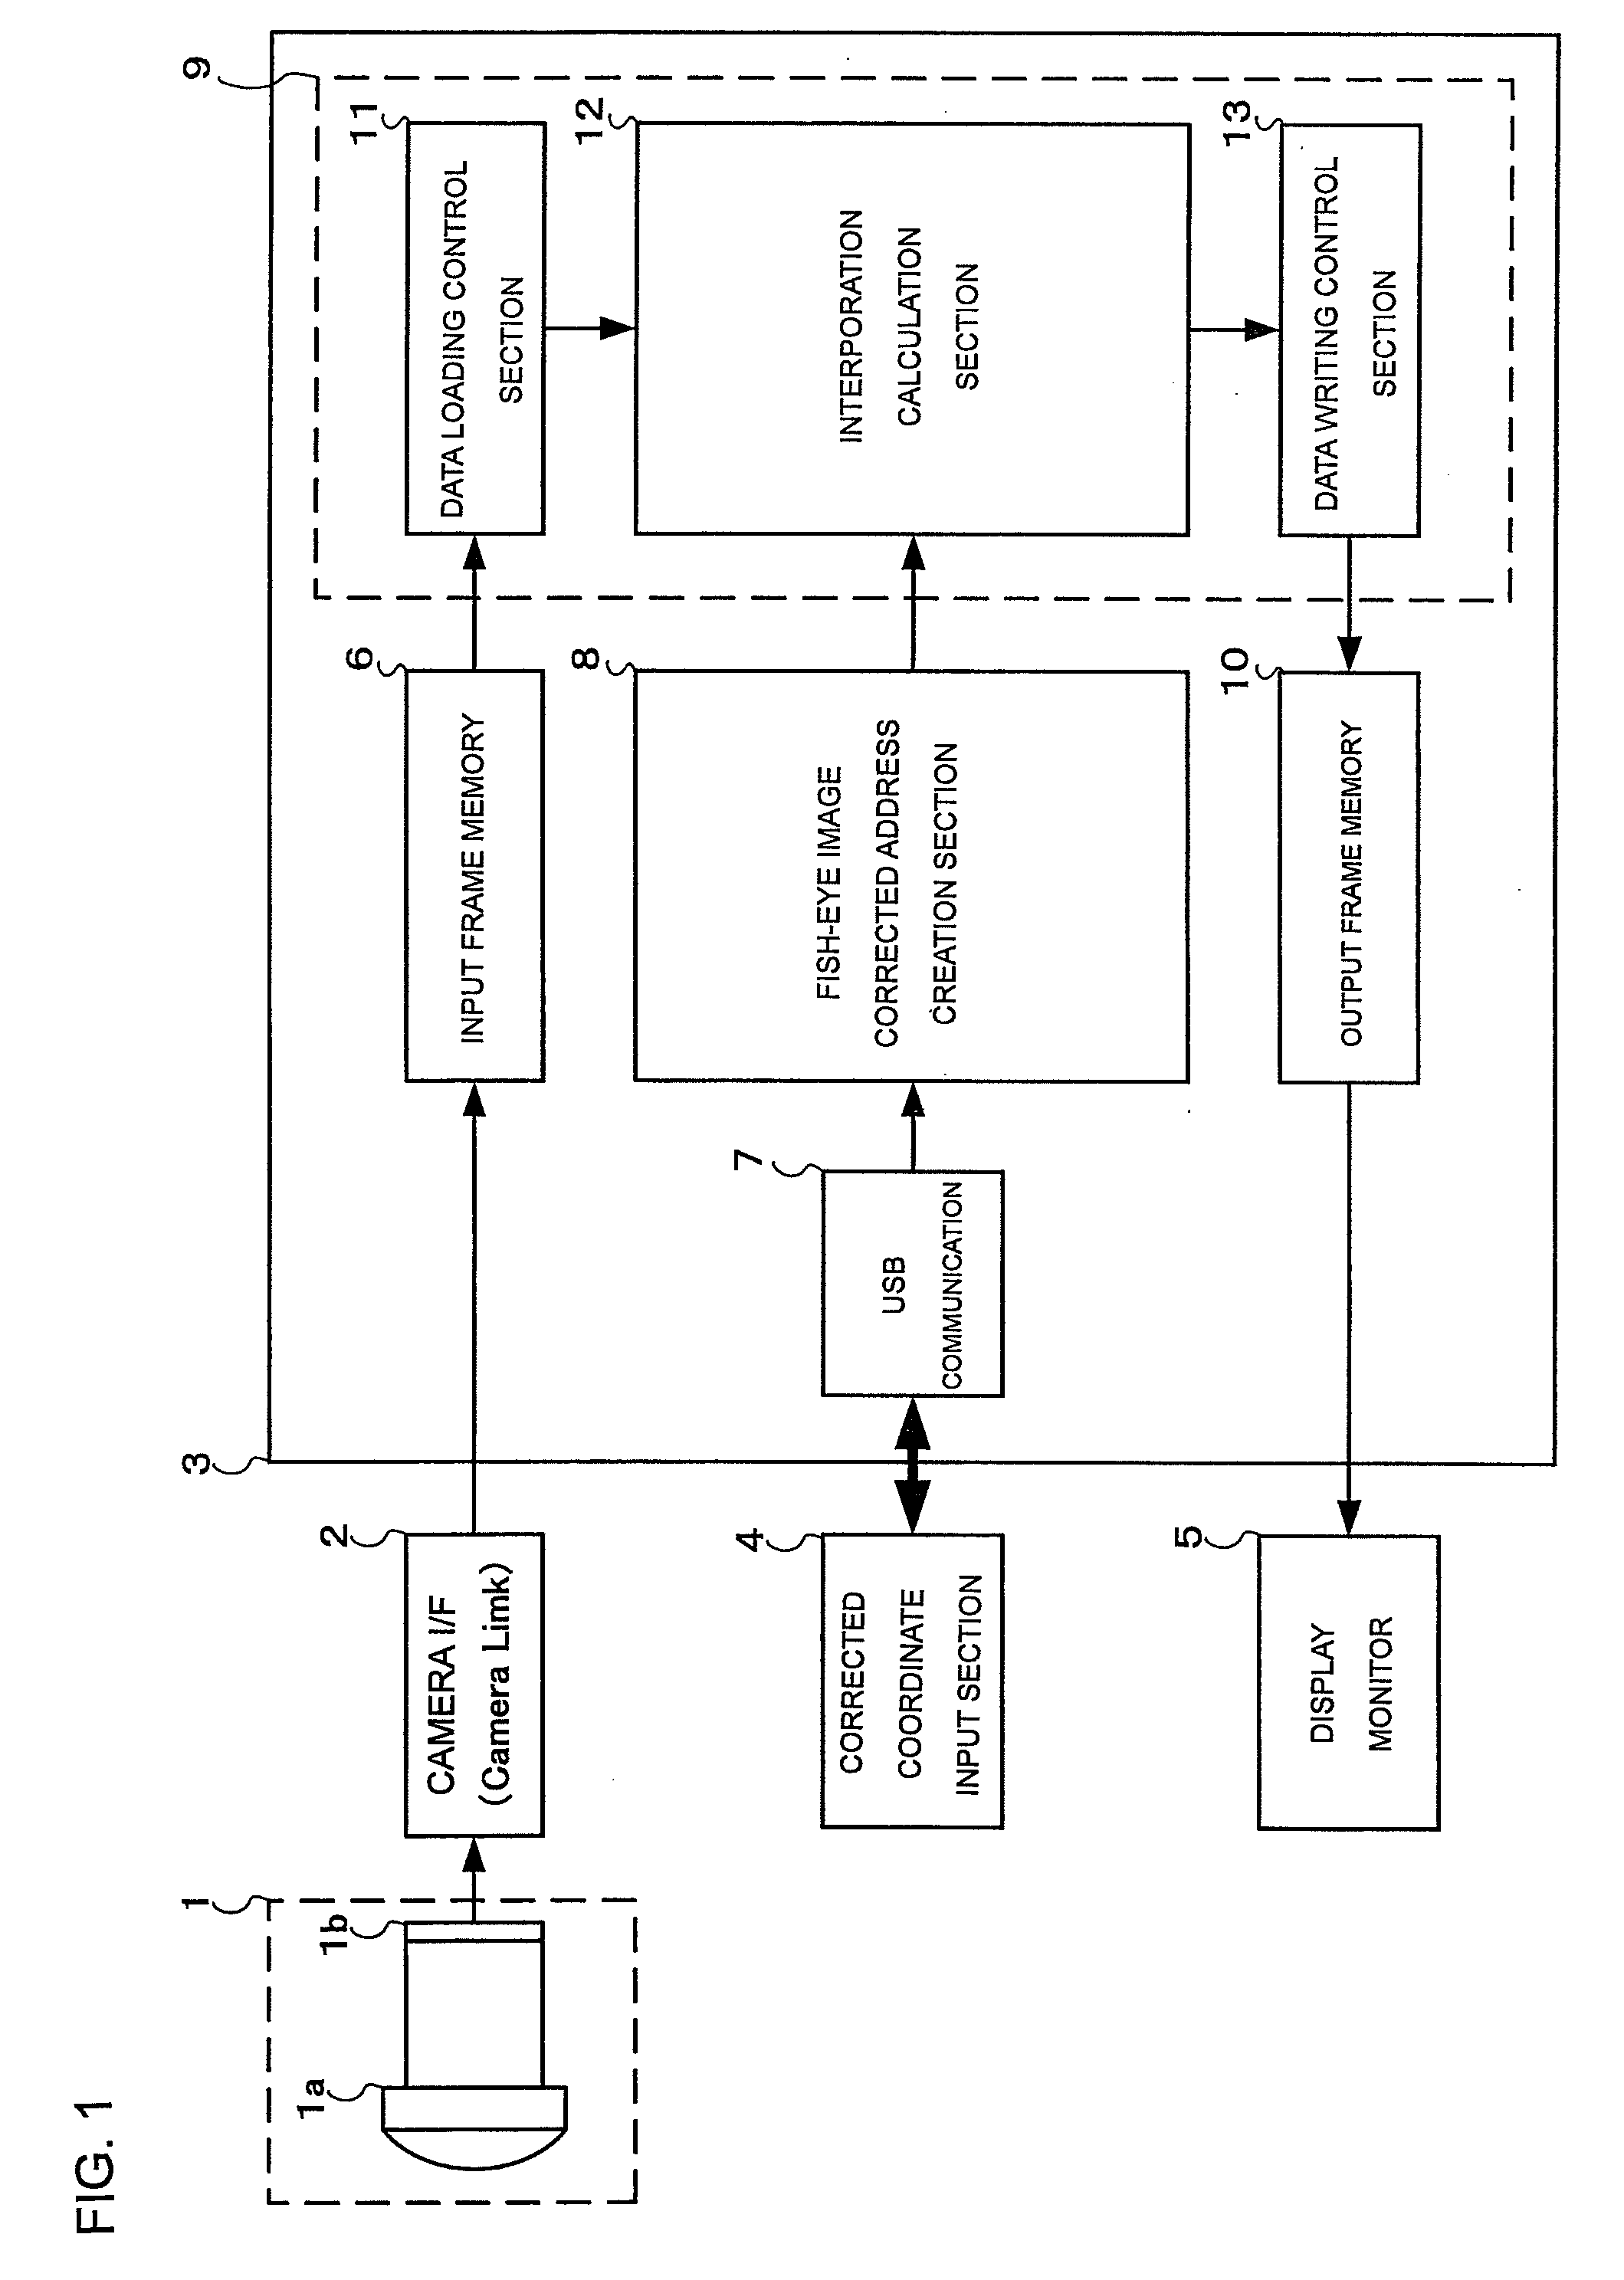 Image processing apparatus and method and a computer-readable recording medium on which an image processing program is stored